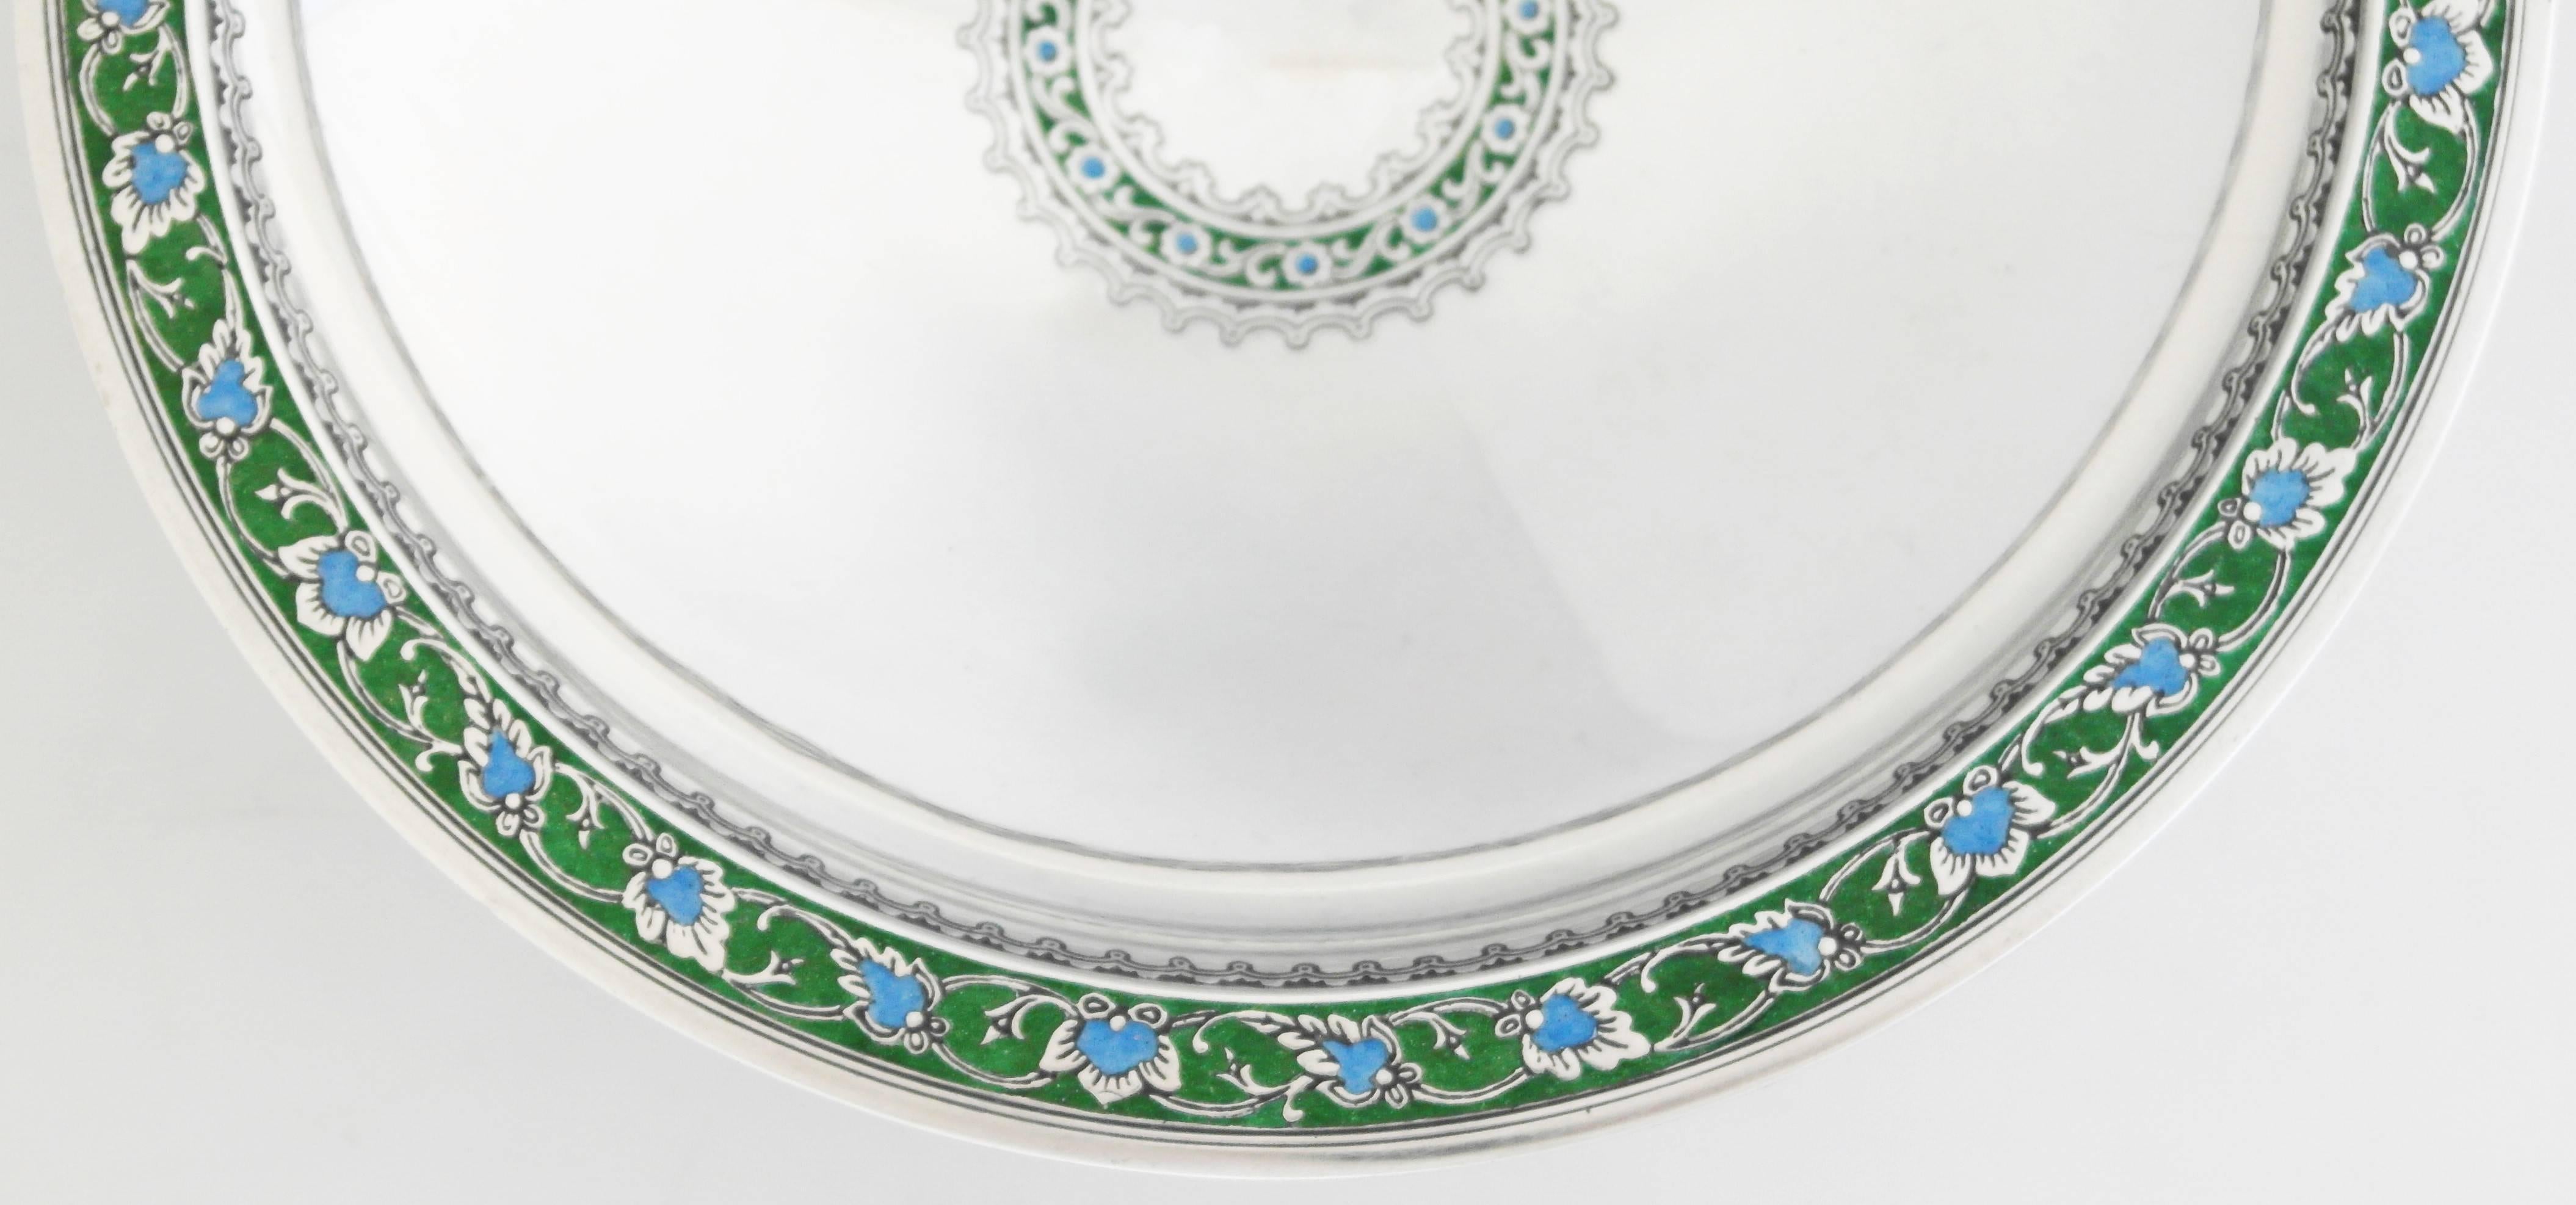 Being offered is a circa 1920 sterling silver bowl by Tiffany & Co. of New York. Art Deco piece, of pedestal form with intricate enameling at the edge & center. Dimensions: 8 inches diameter x 2 1/4 inches height. Weight 13 oz. Marked as